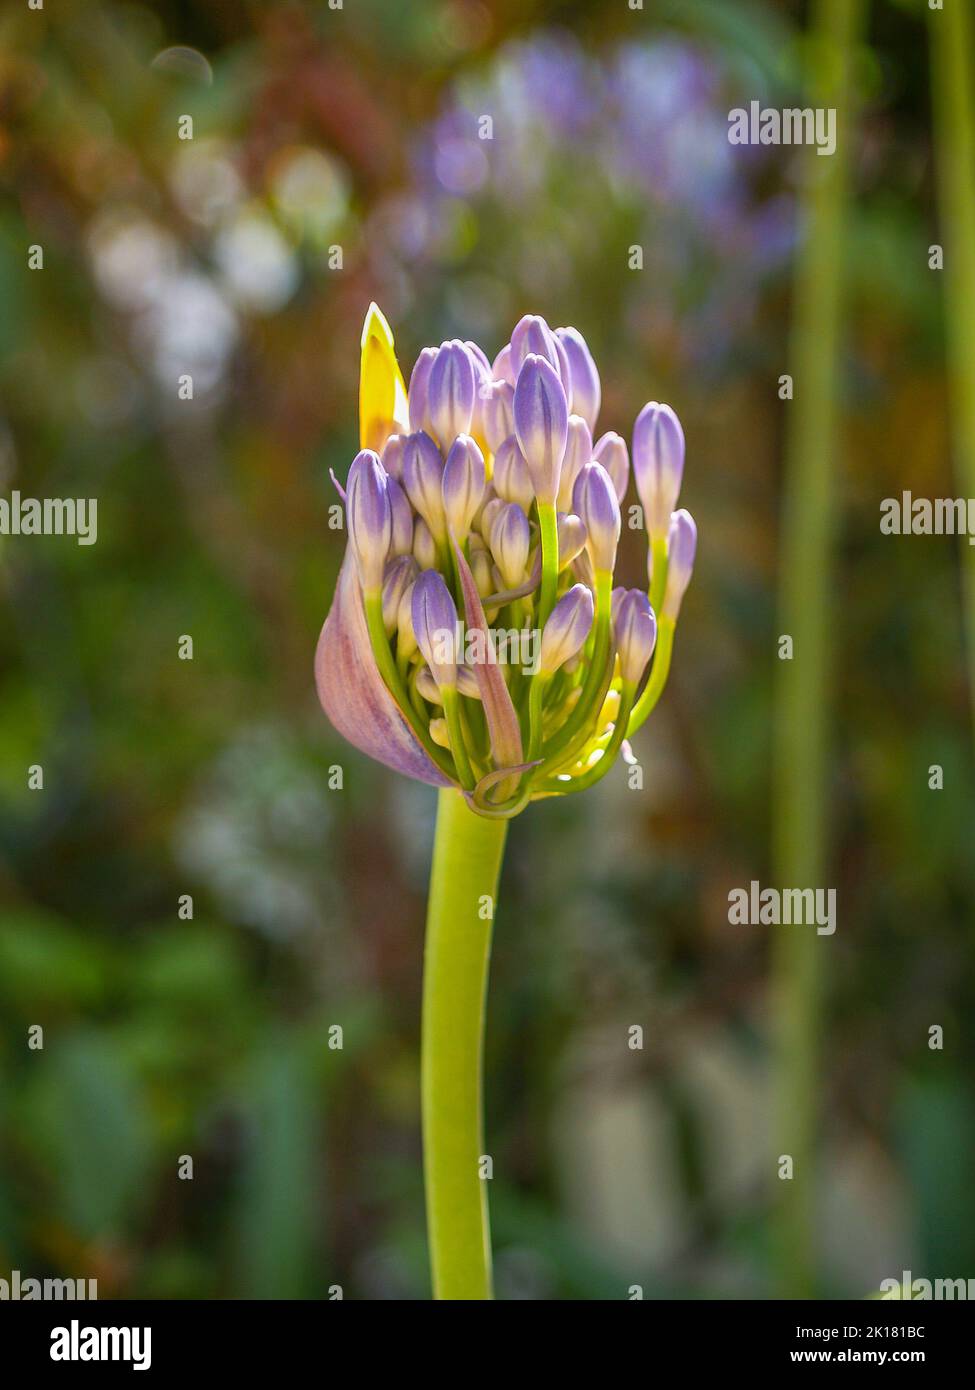 New growth in flower of agapanthus in sun. Stock Photo